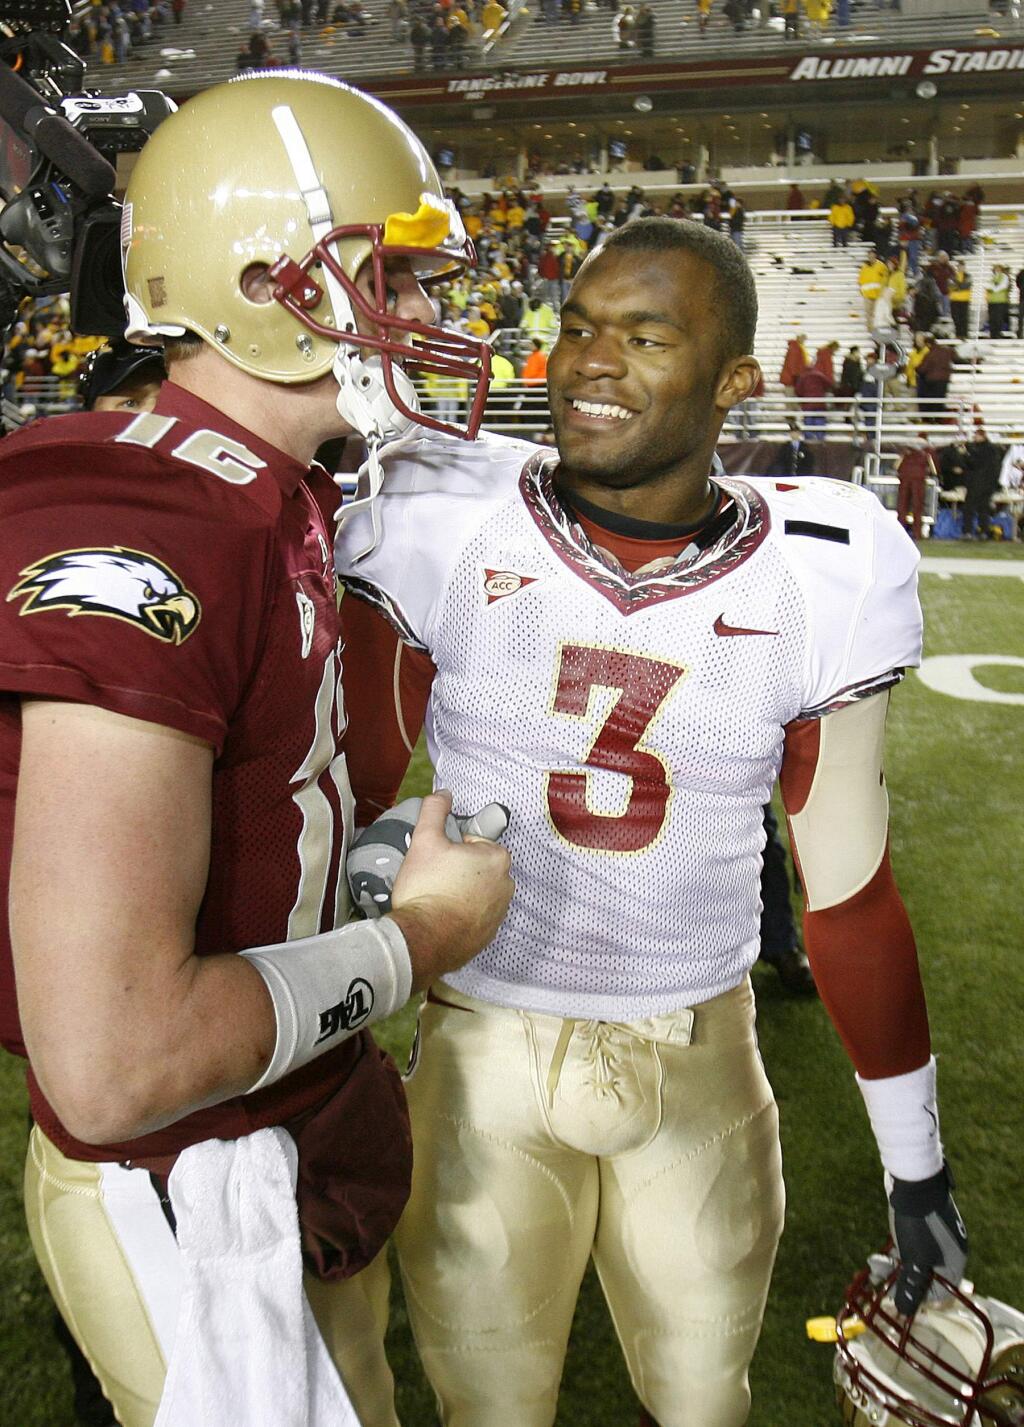 FILE - In this Nov. 3, 2007, file photo, Boston College quarterback Matt Ryan, left, congratulates Florida State's Myron Rolle after FSU defeated Boston College 27-17 in an NCAA college football game at Alumni Stadium in Boston. Rolle was an All-American defensive back at Florida State but his bigger accomplishments have come off the field. He was a Rhodes Scholar and last month graduated from Florida State's College of Medicine. Rolle begins his neurosurgery residency next month at Harvard Medical School. (AP Photo/Tallahassee Democrat, Mike Ewen, File)/Tallahassee Democrat via AP)